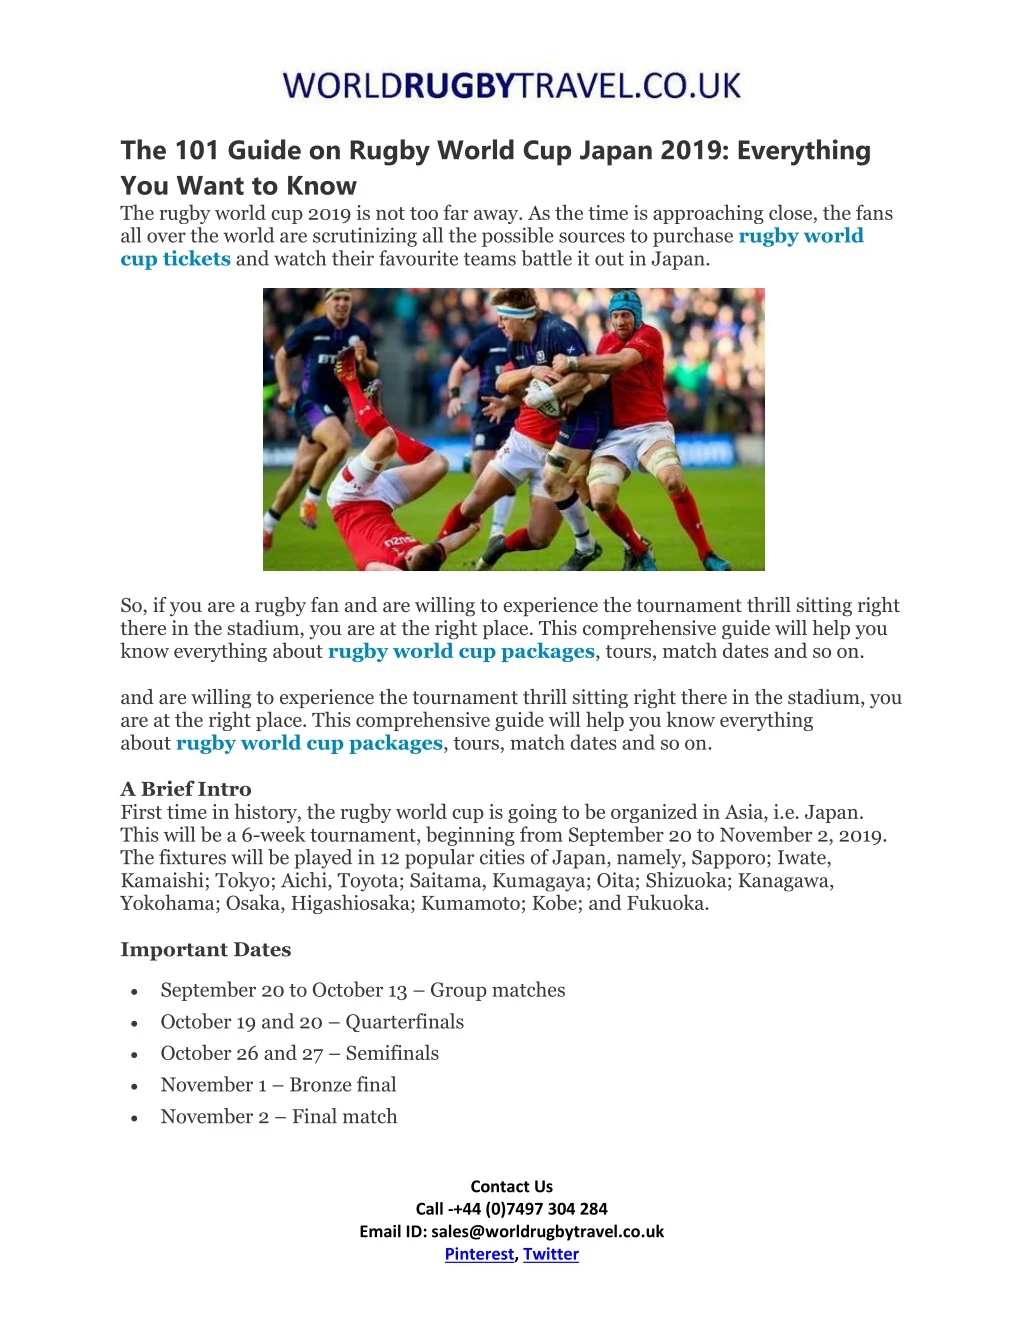 the 101 guide on rugby world cup japan 2019